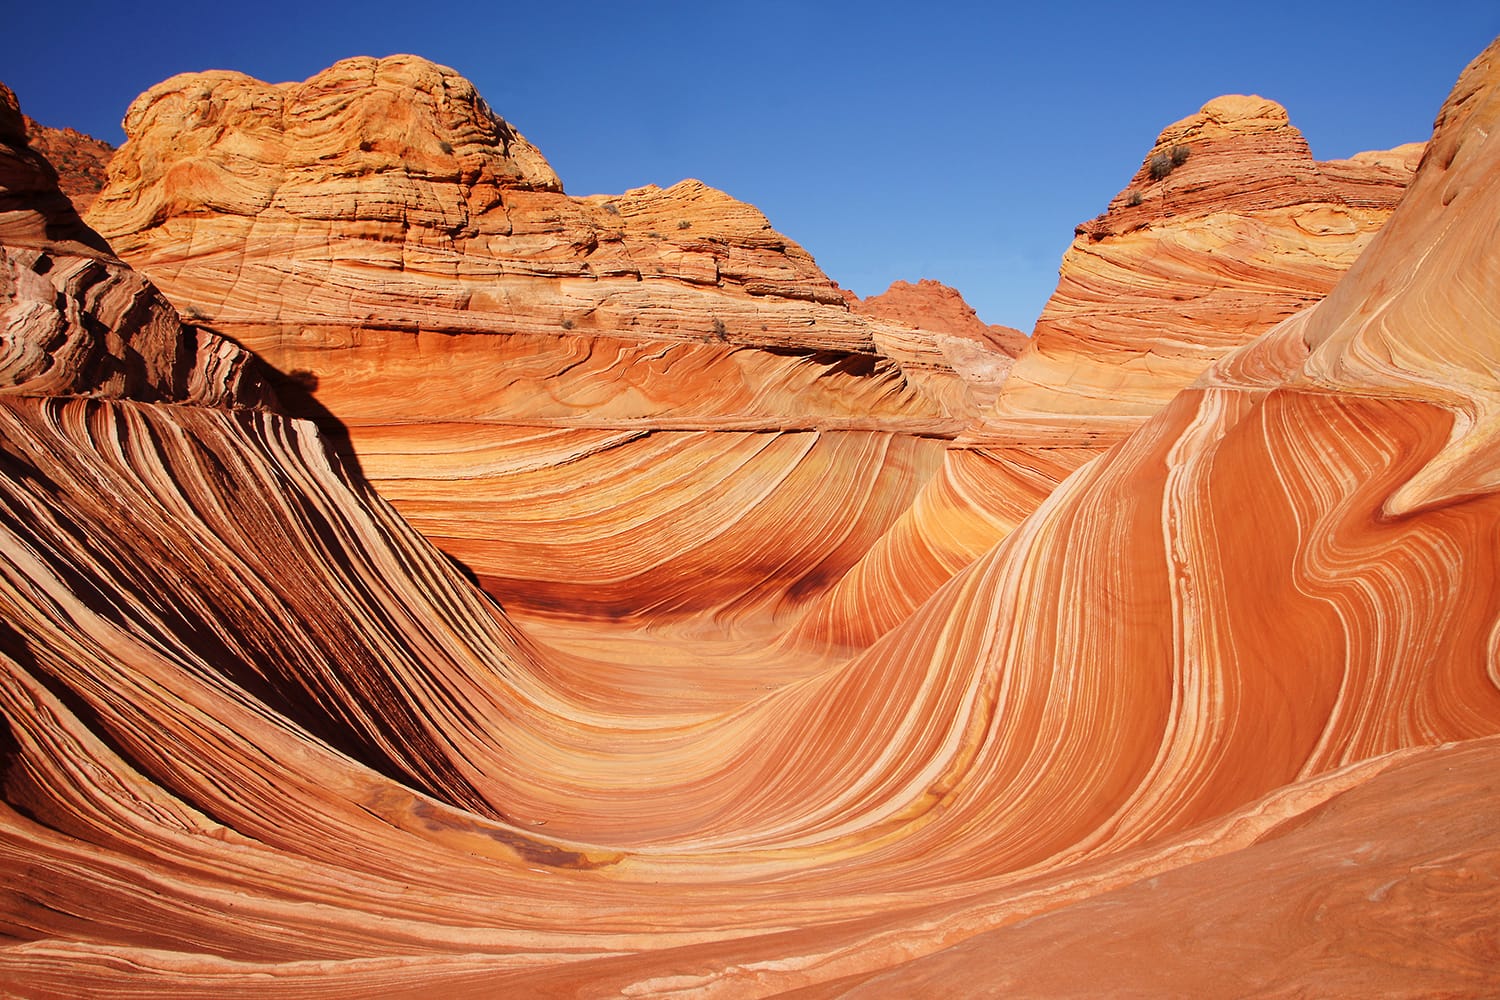 The Wave in the Vermilion Cliffs National Monument in Arizona, USA